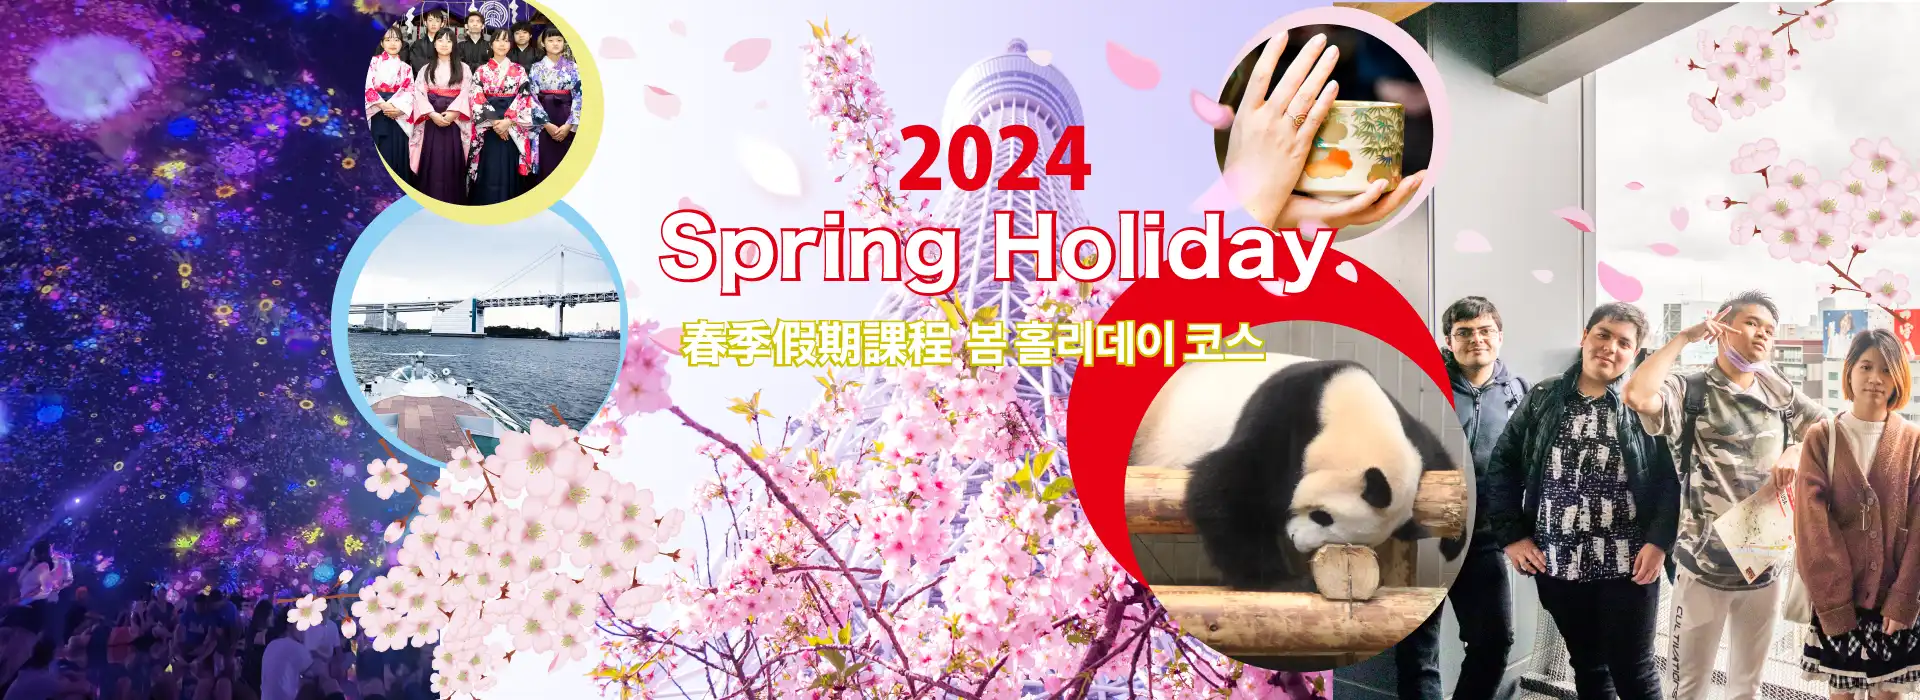 2024 Spring Holiday Course